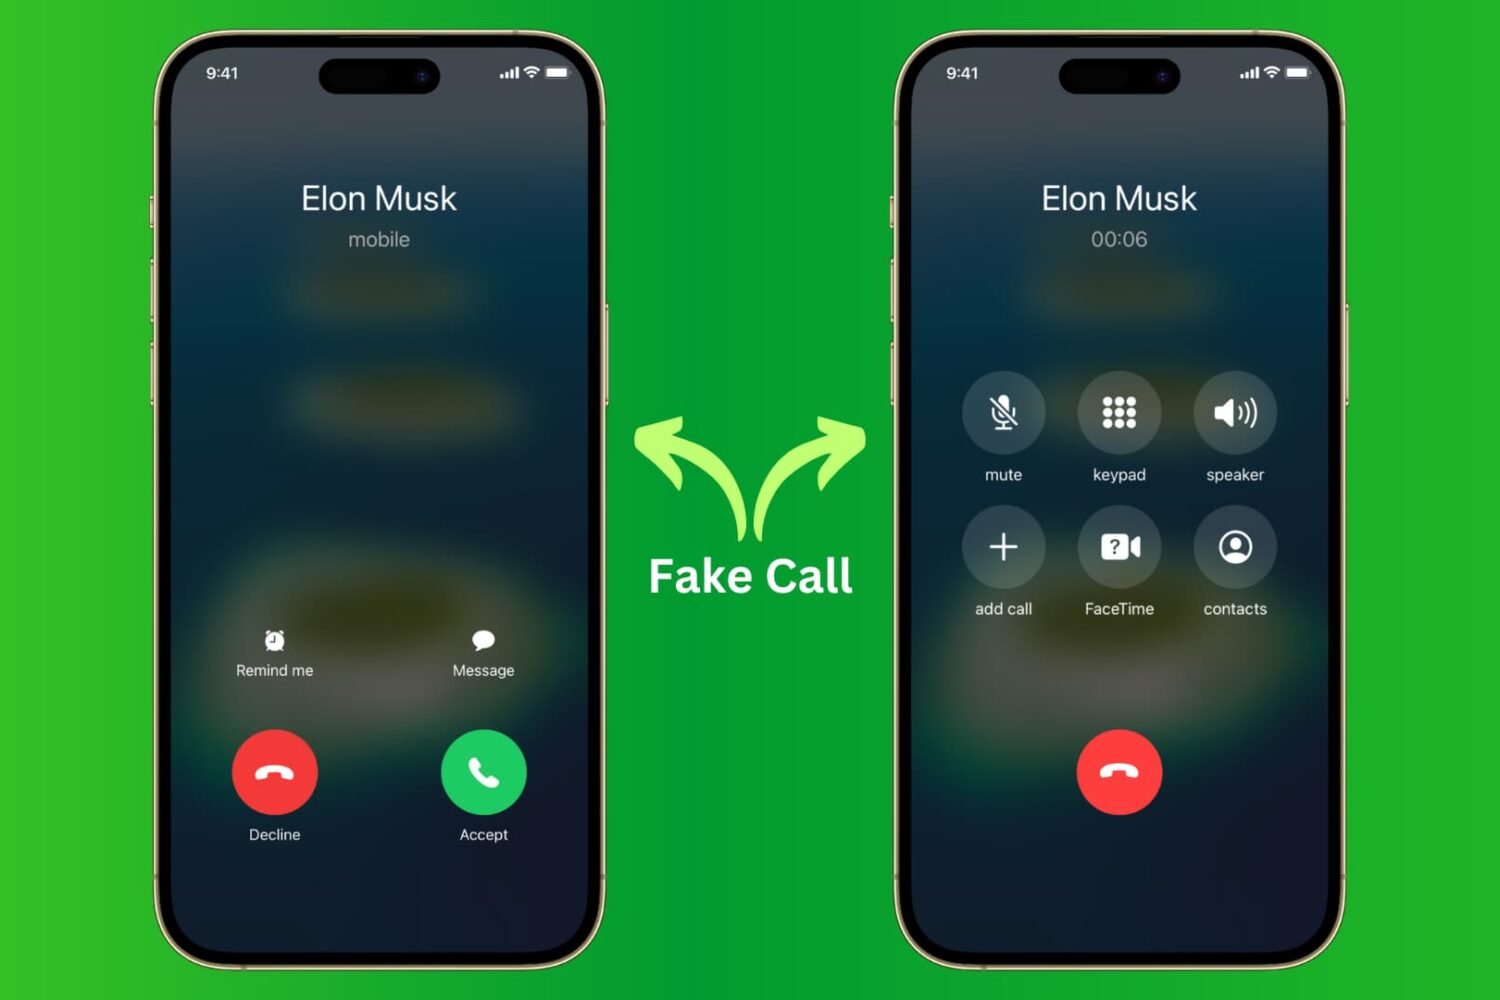 Receiving and picking up a fake call on iPhone